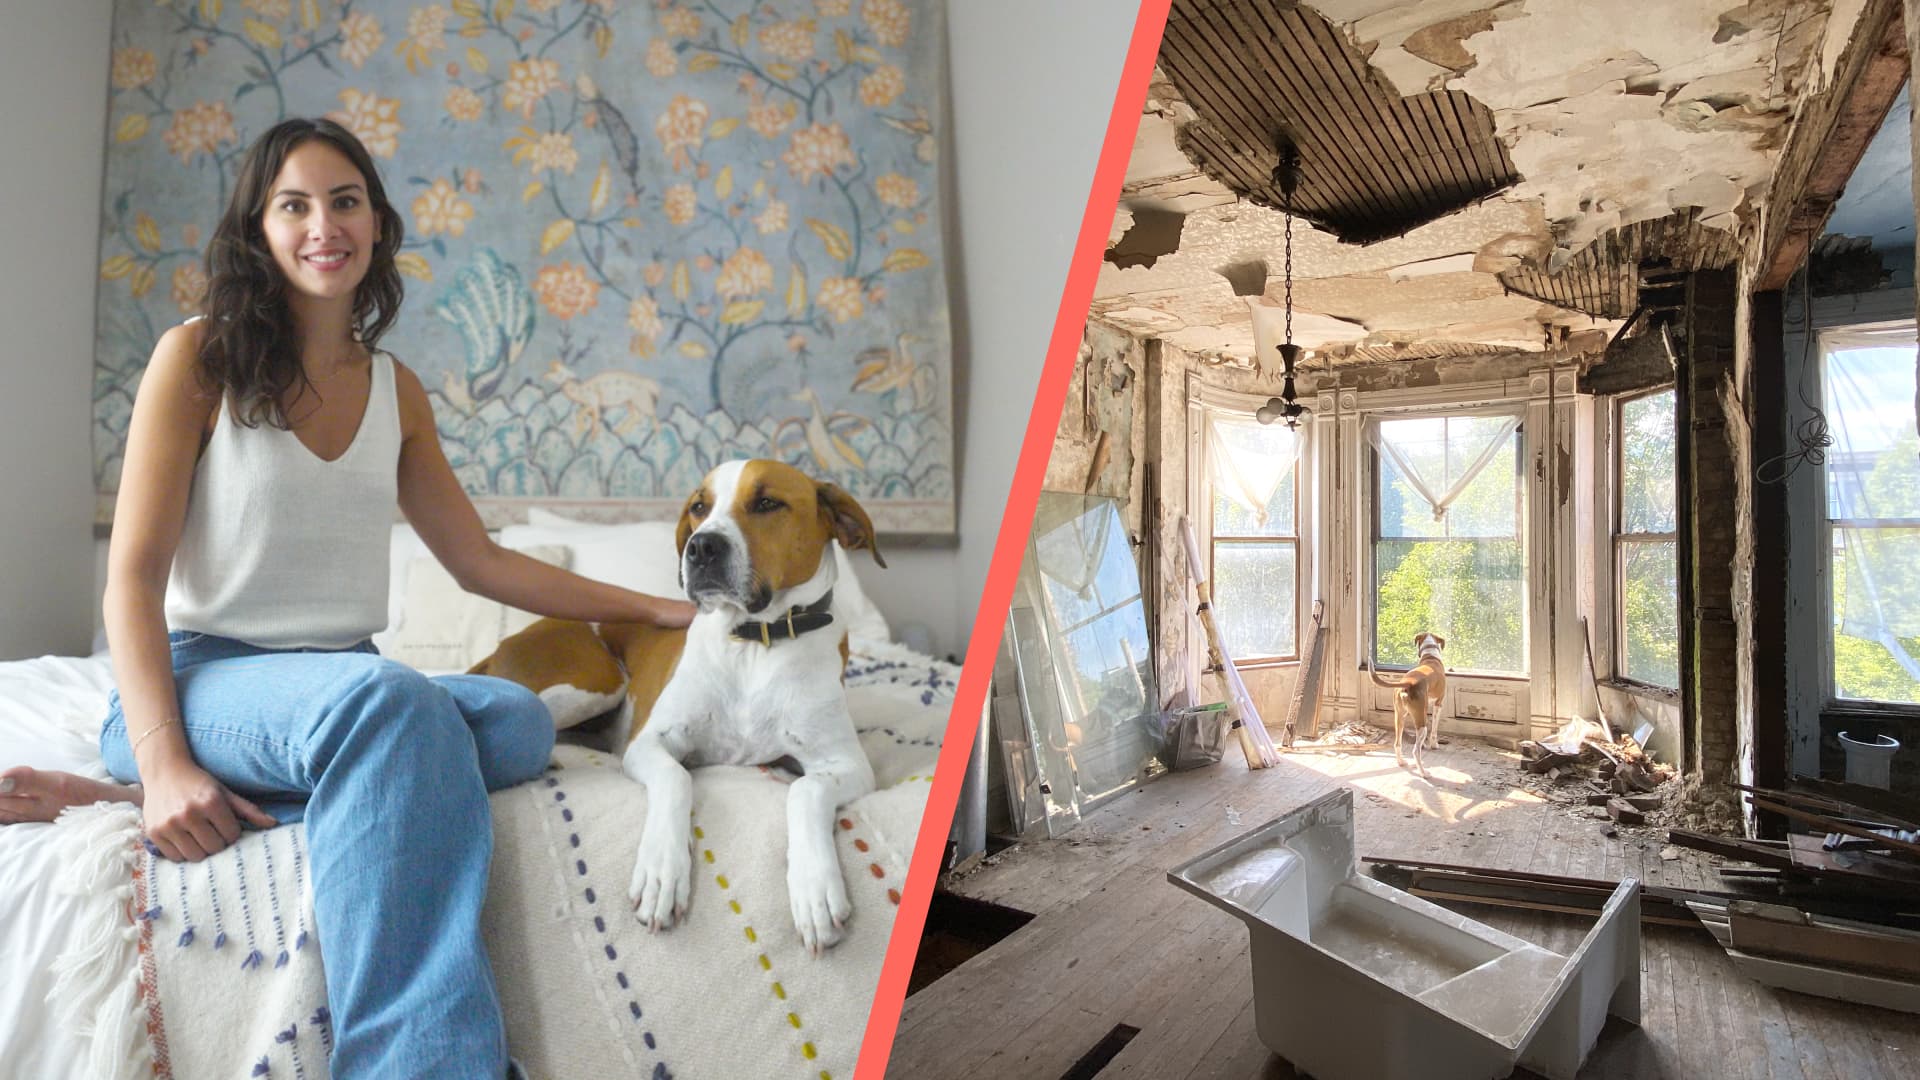 30-year-old bought a ‘cheap, old’ abandoned house for $16,500—and completely transformed it: Take a look inside